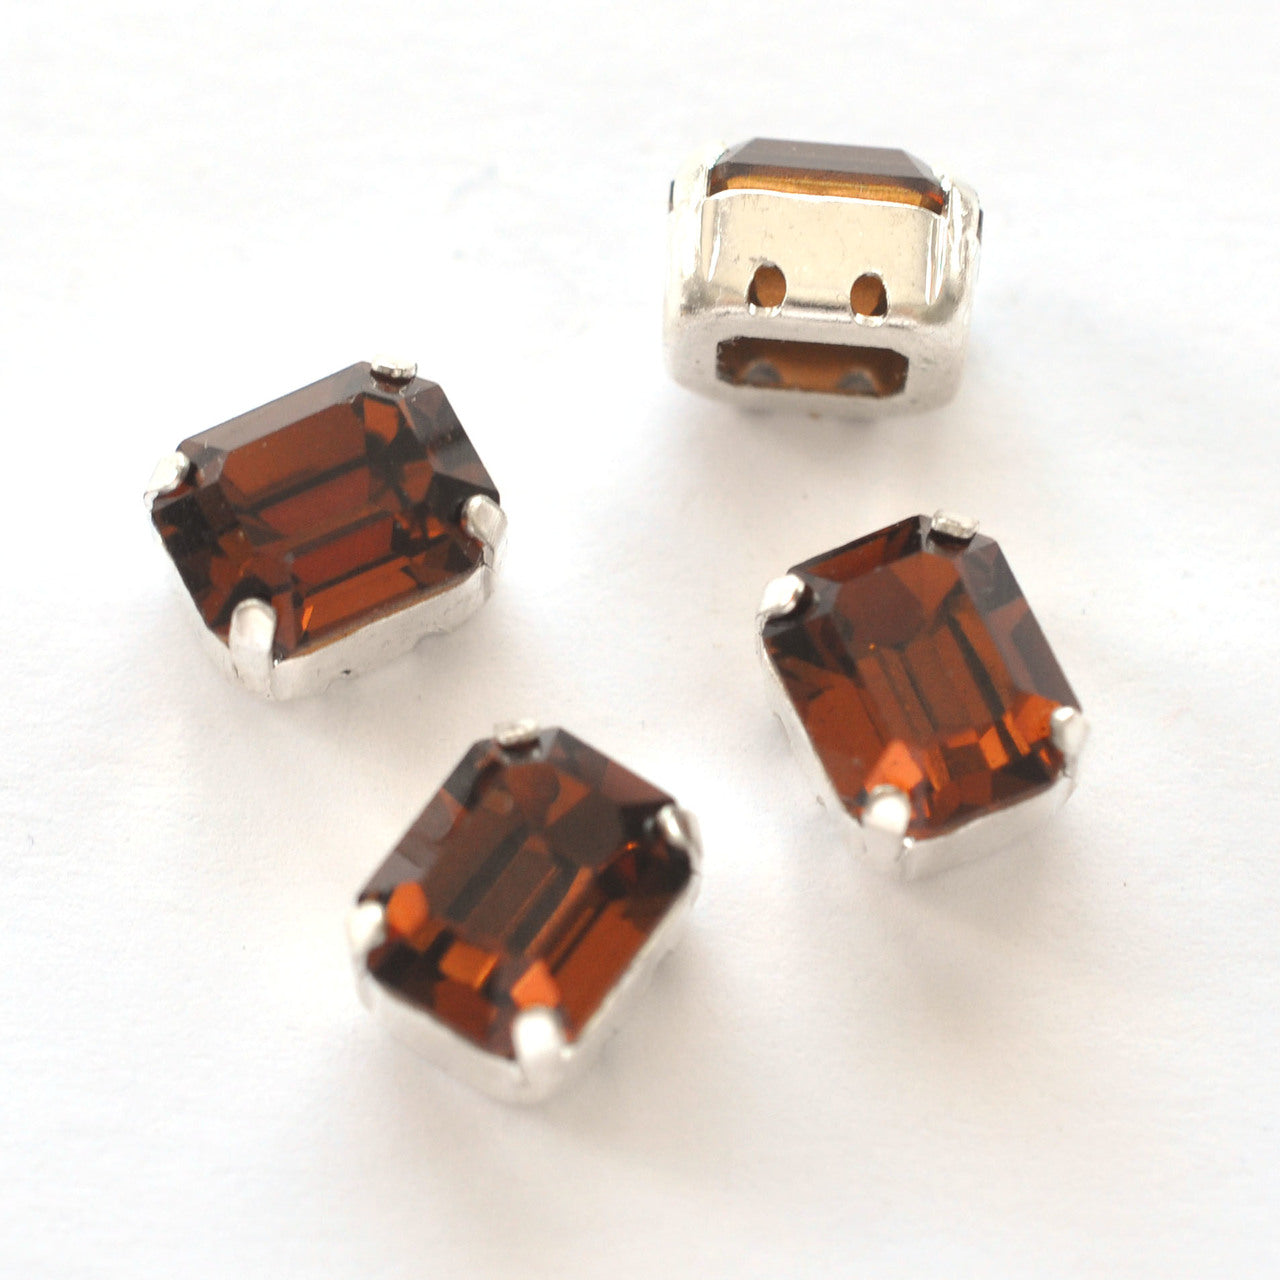 Smoked Topaz 10x8mm Octagon Sew On Crystals - 4 Pieces